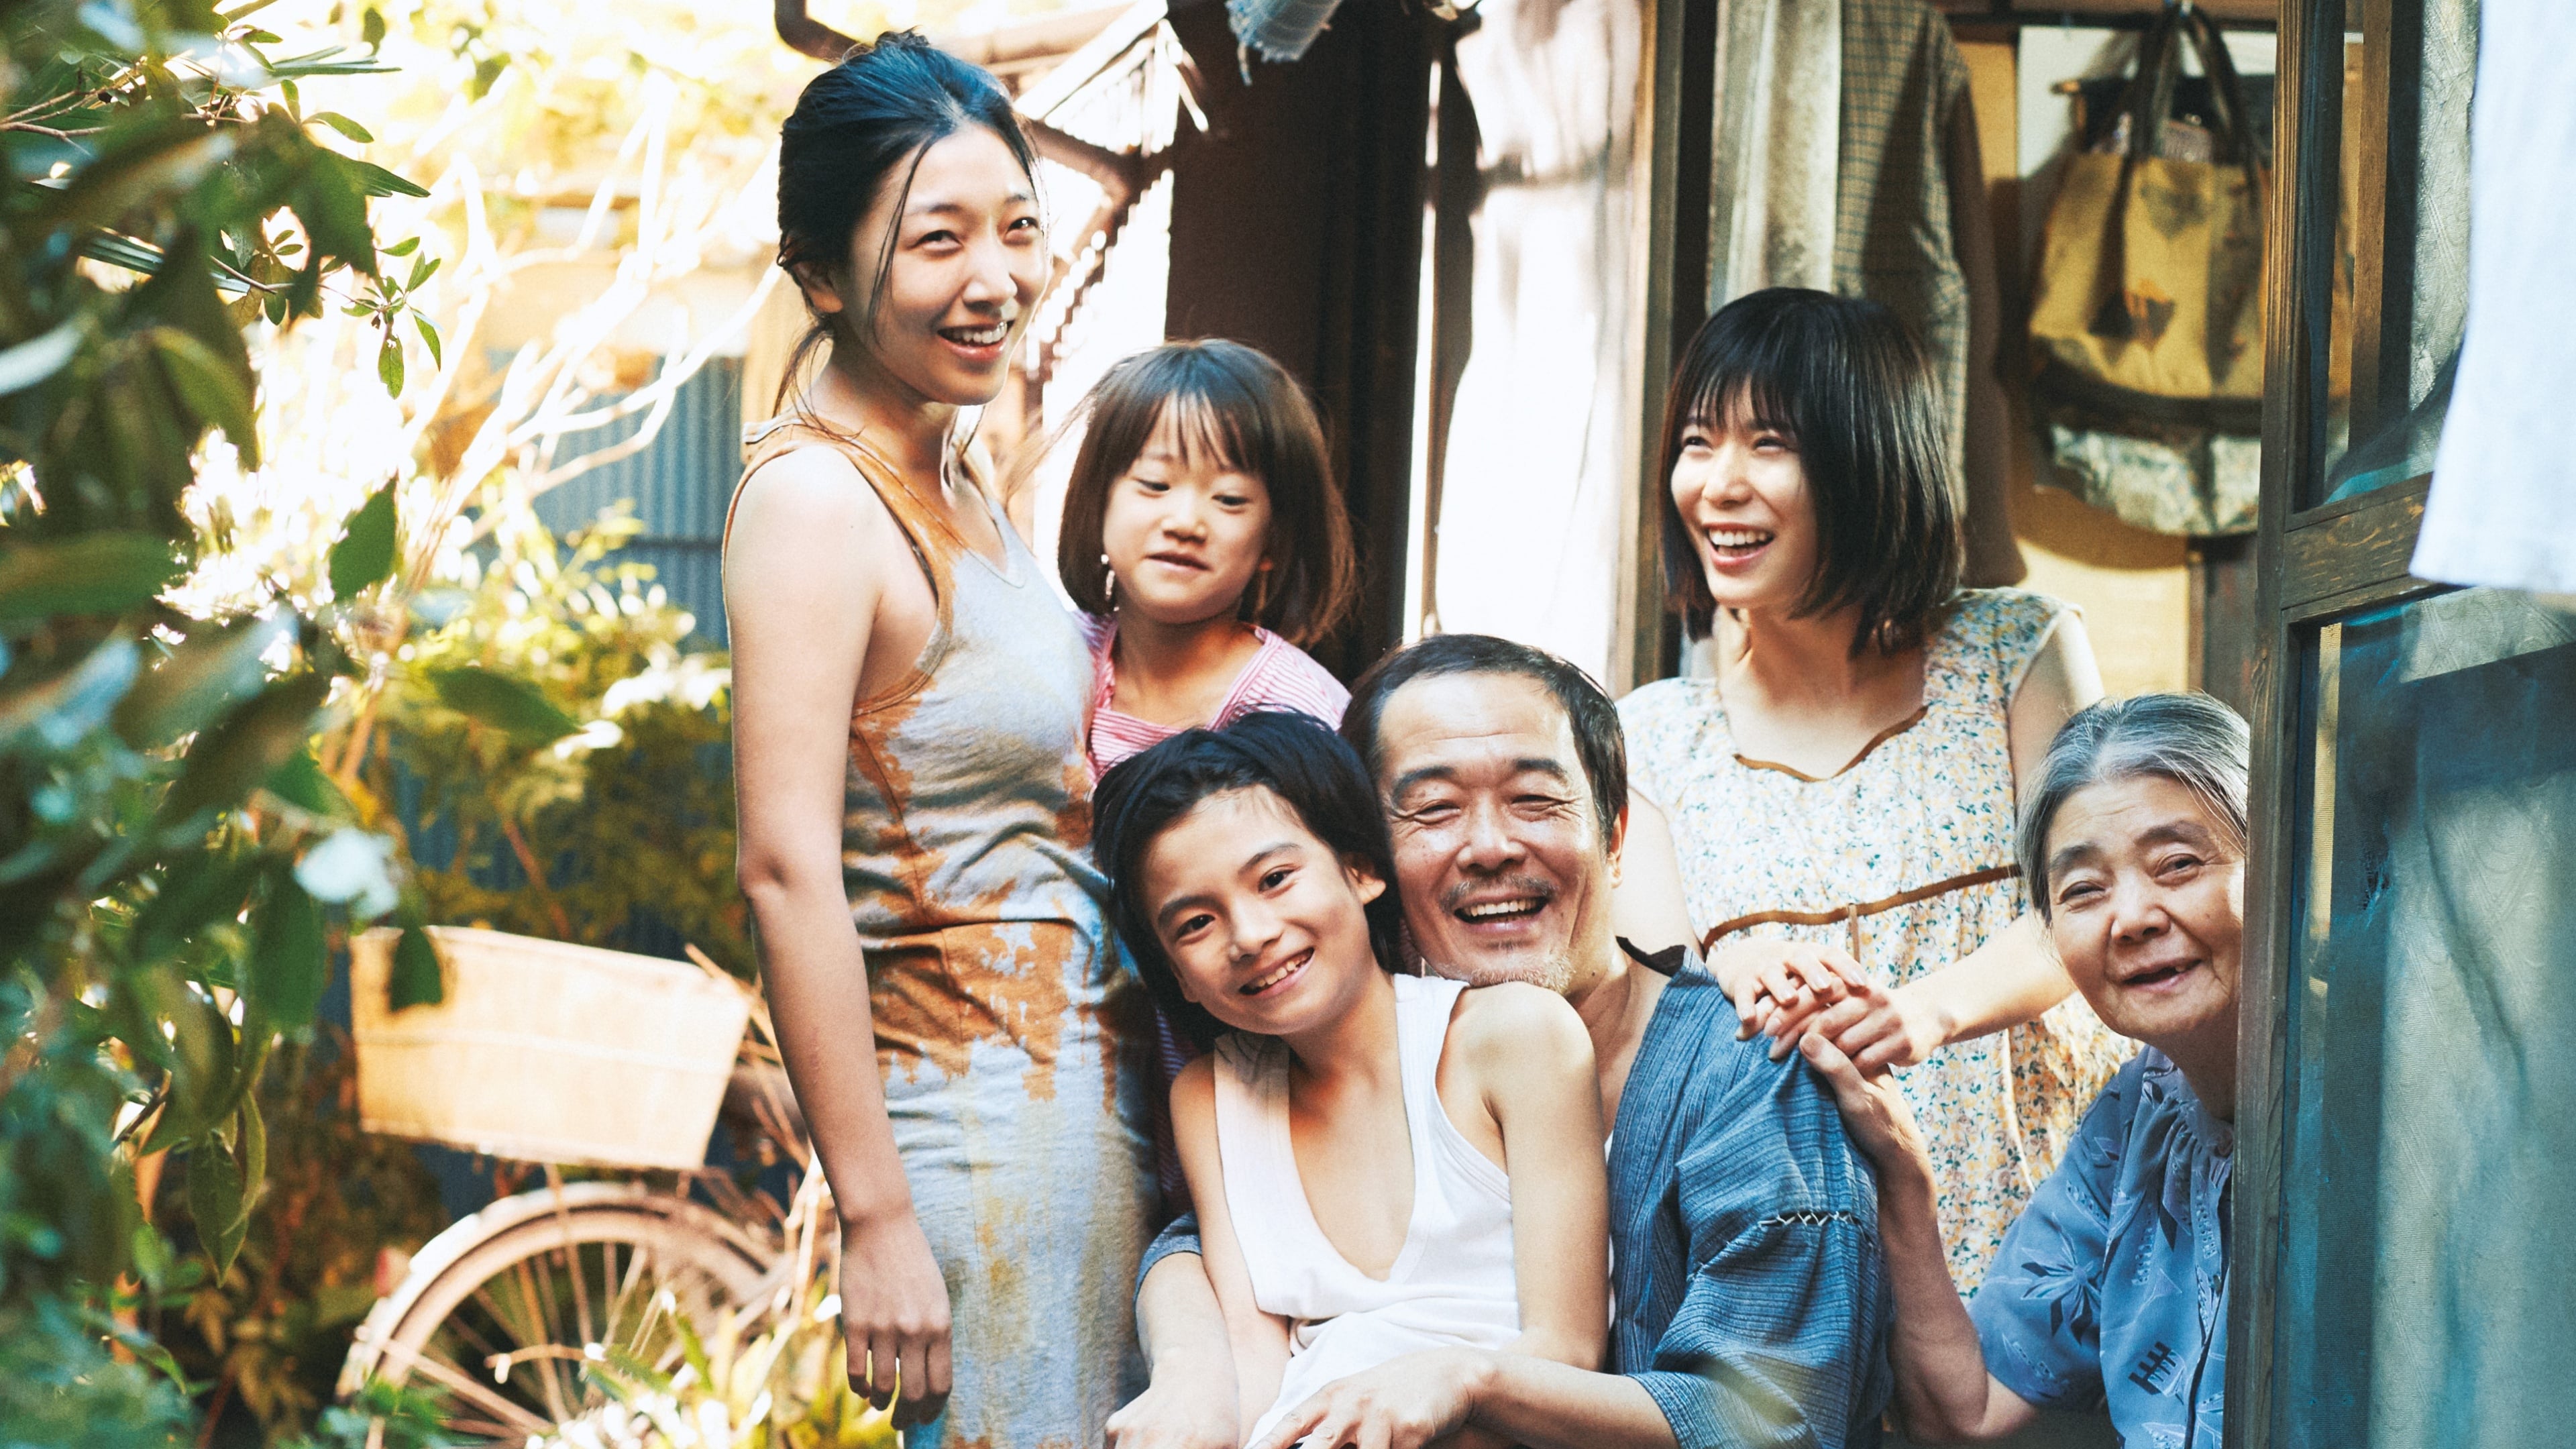 Shoplifters 2018 123movies